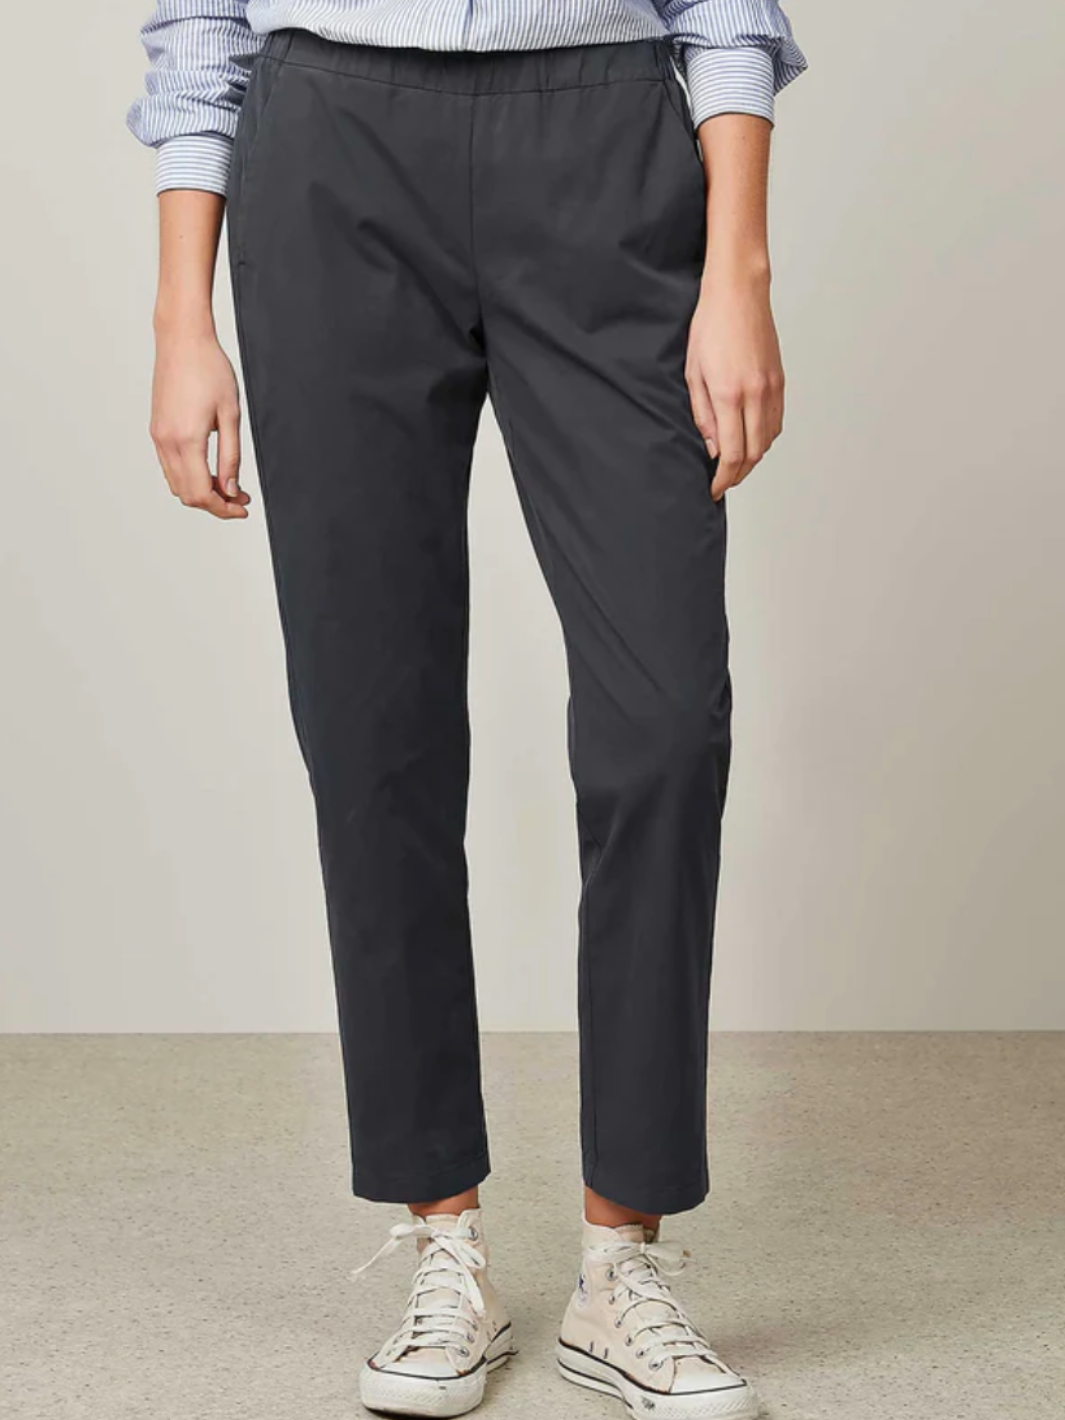 PAOLO PANT IN GRAPHITE - Romi Boutique